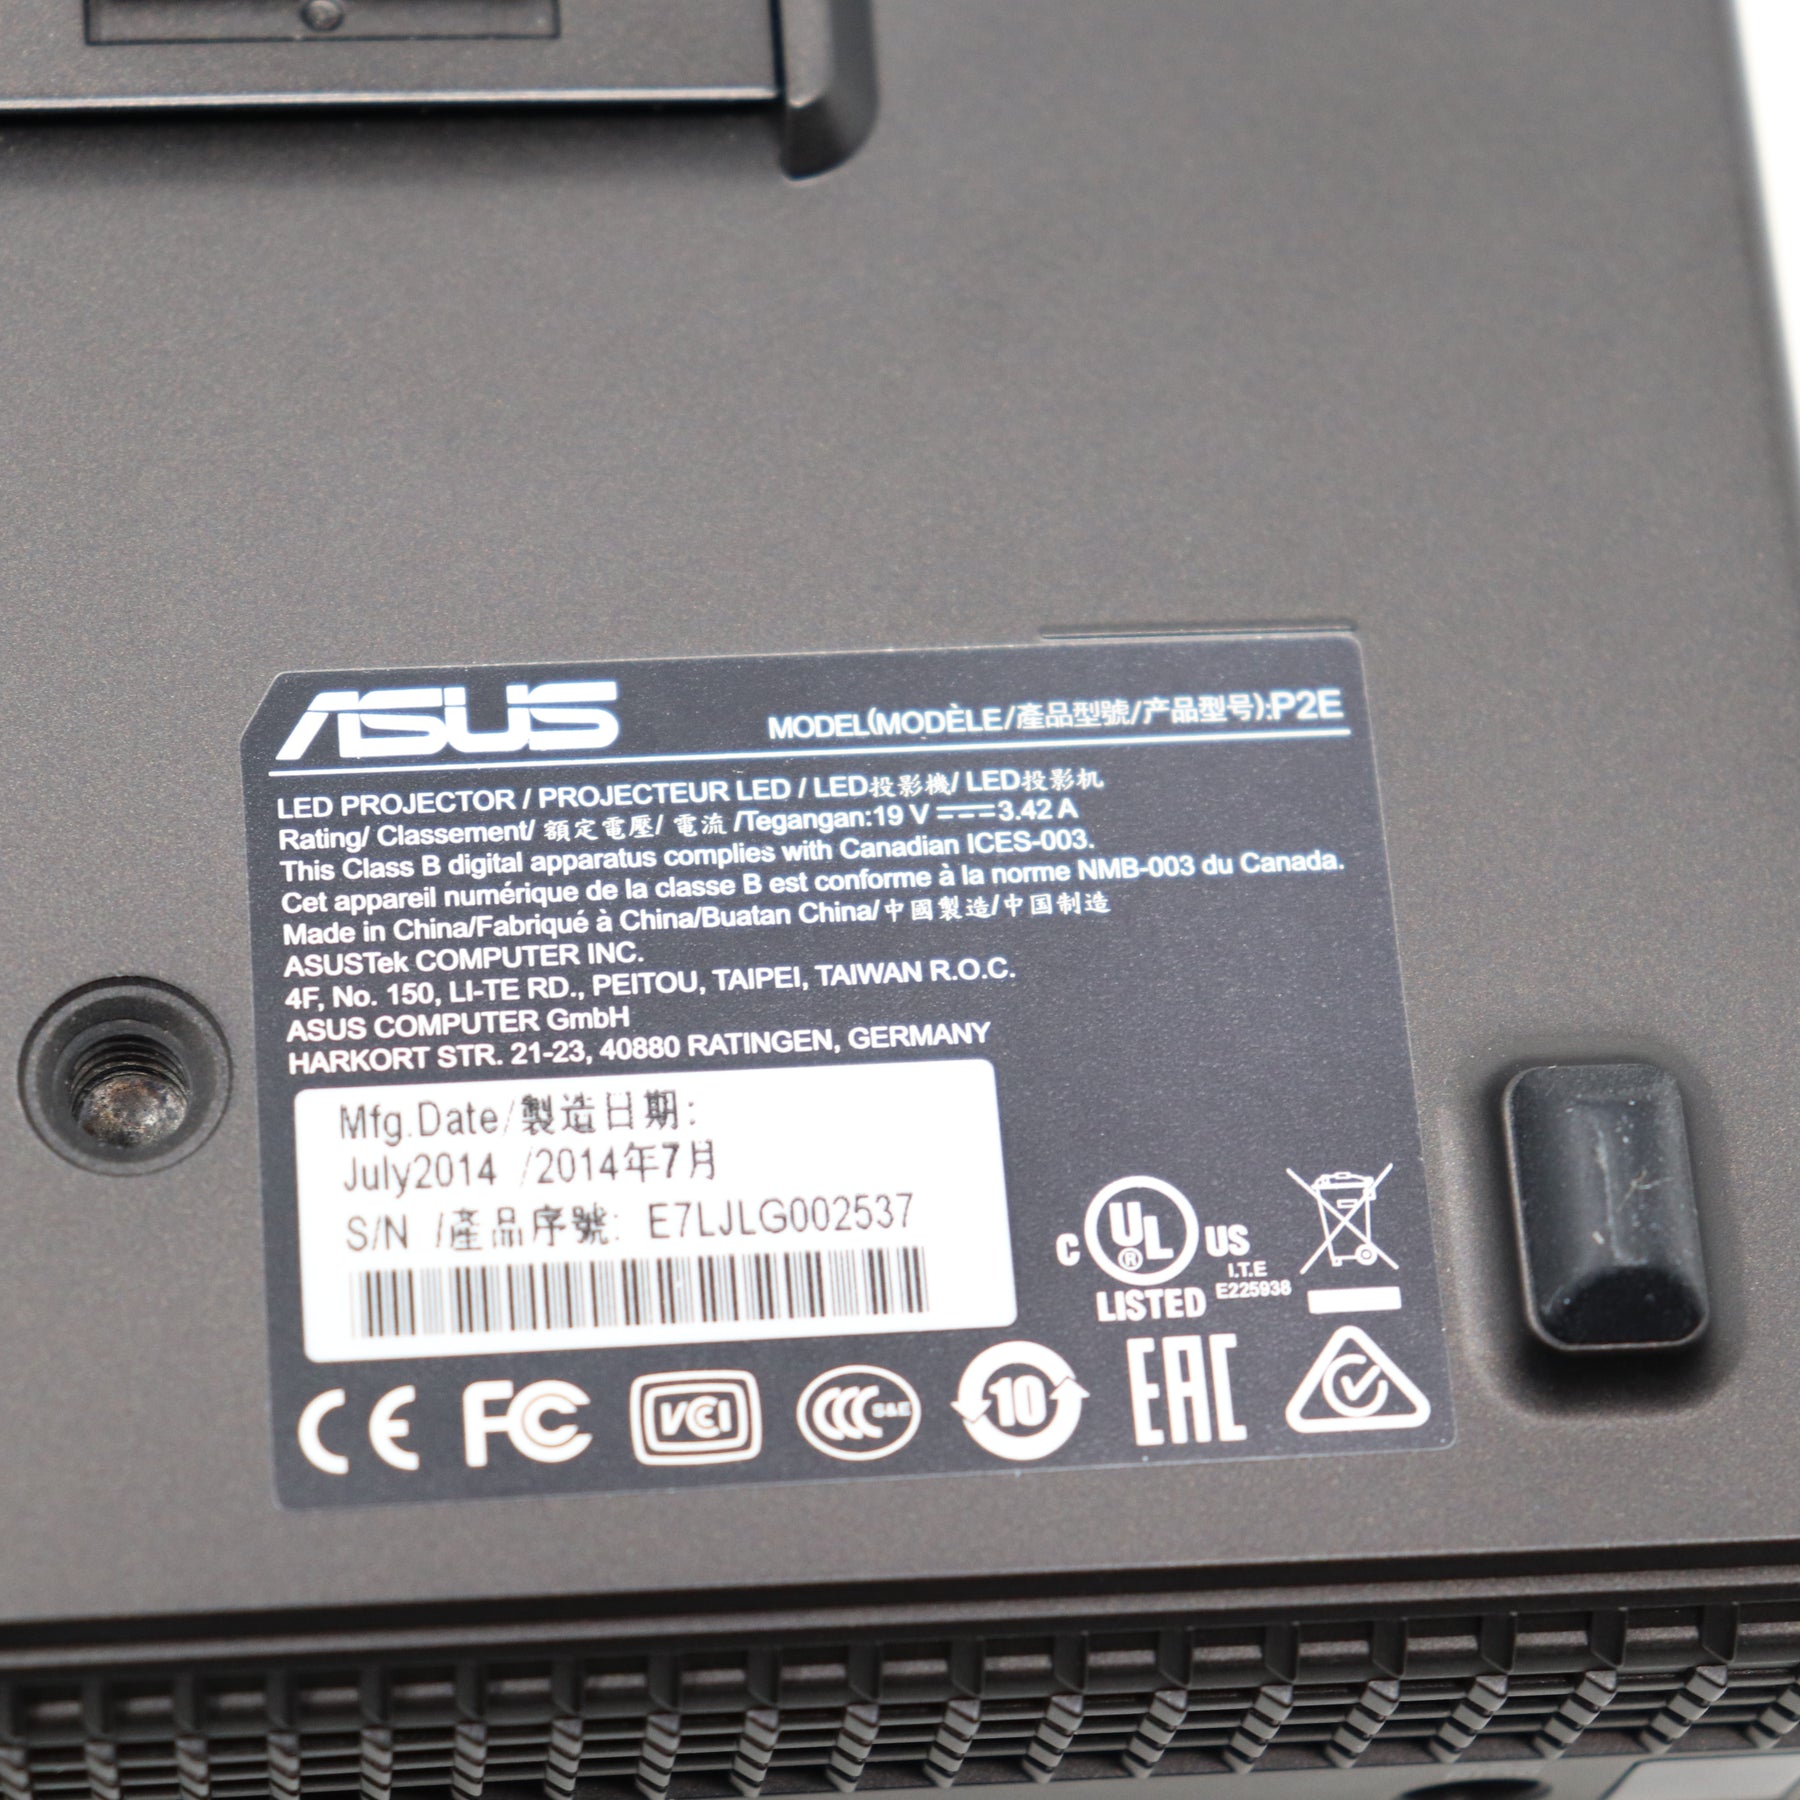 ASUS Short Throw Portable LED Projector P2E